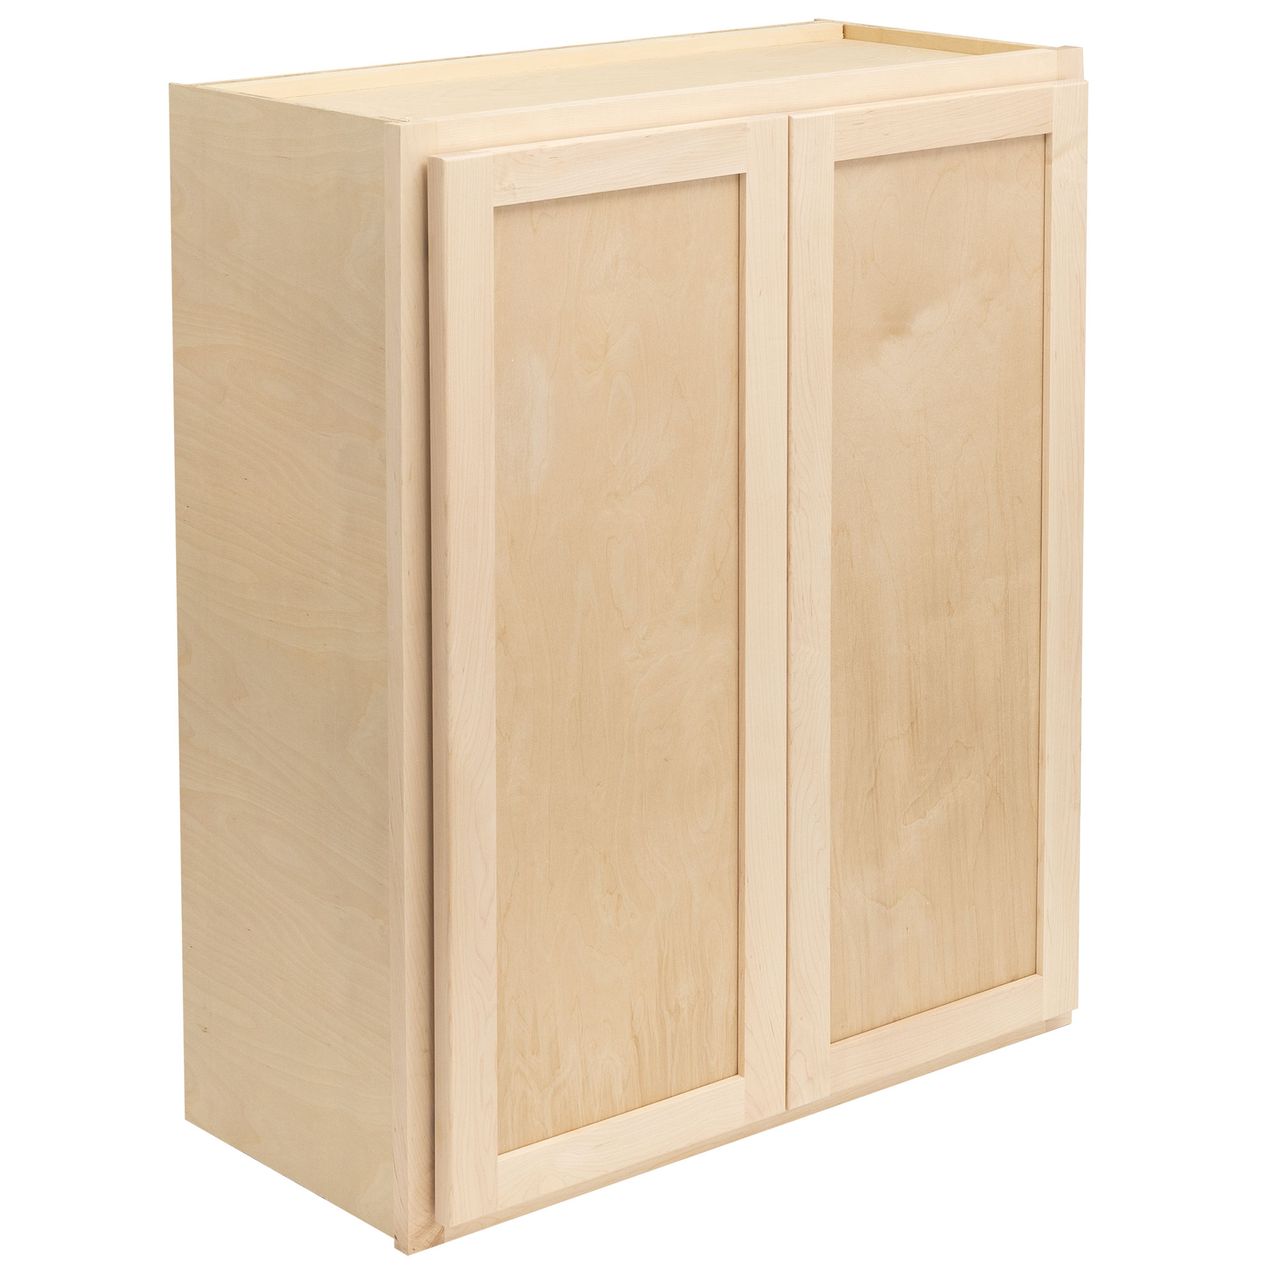 Quicklock RTA (Ready-to-Assemble) Raw Maple Wall Cabinet- Large 30"H x (27", 30", 33", 36"W)